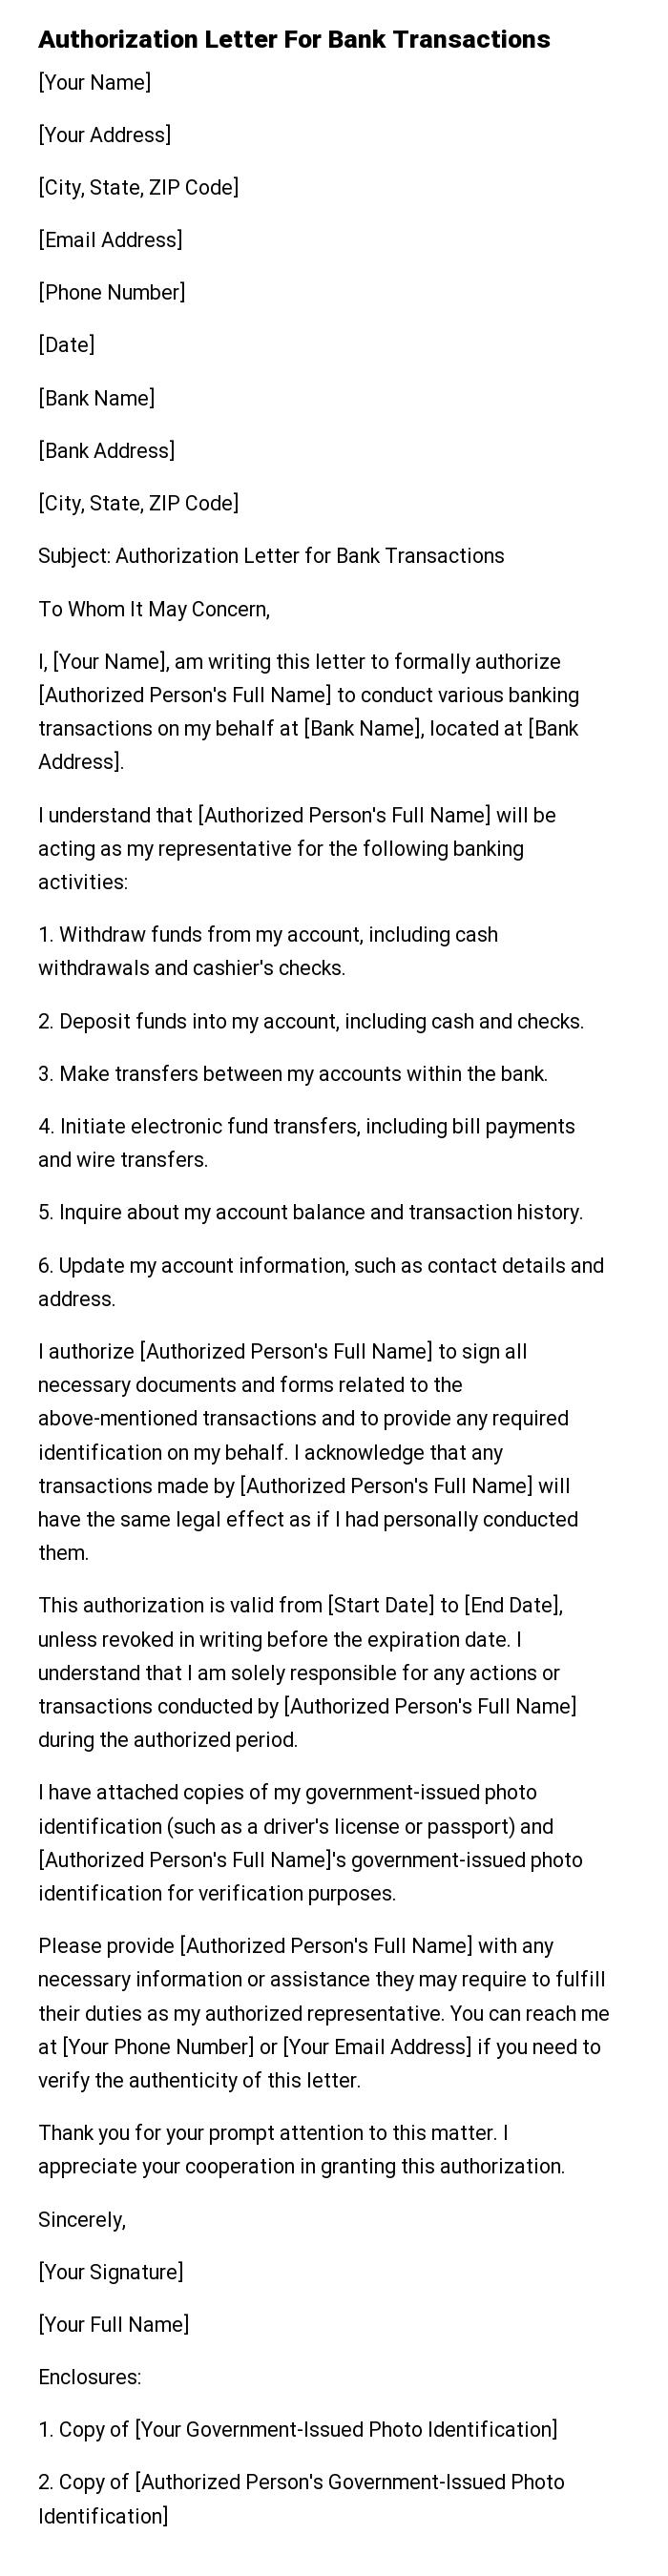 Authorization Letter For Bank Transactions